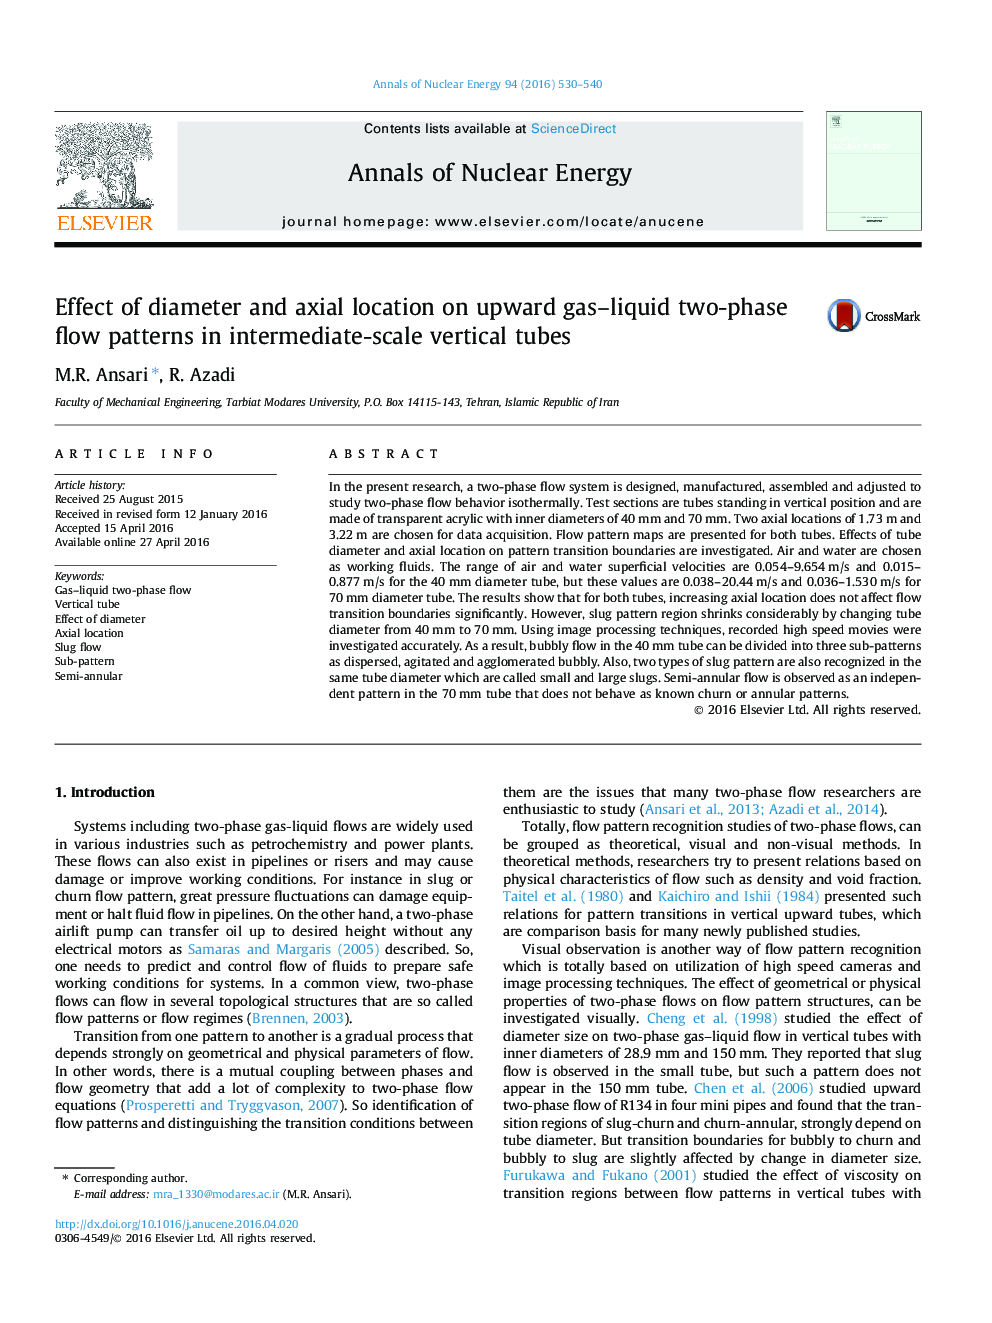 Effect of diameter and axial location on upward gas-liquid two-phase flow patterns in intermediate-scale vertical tubes